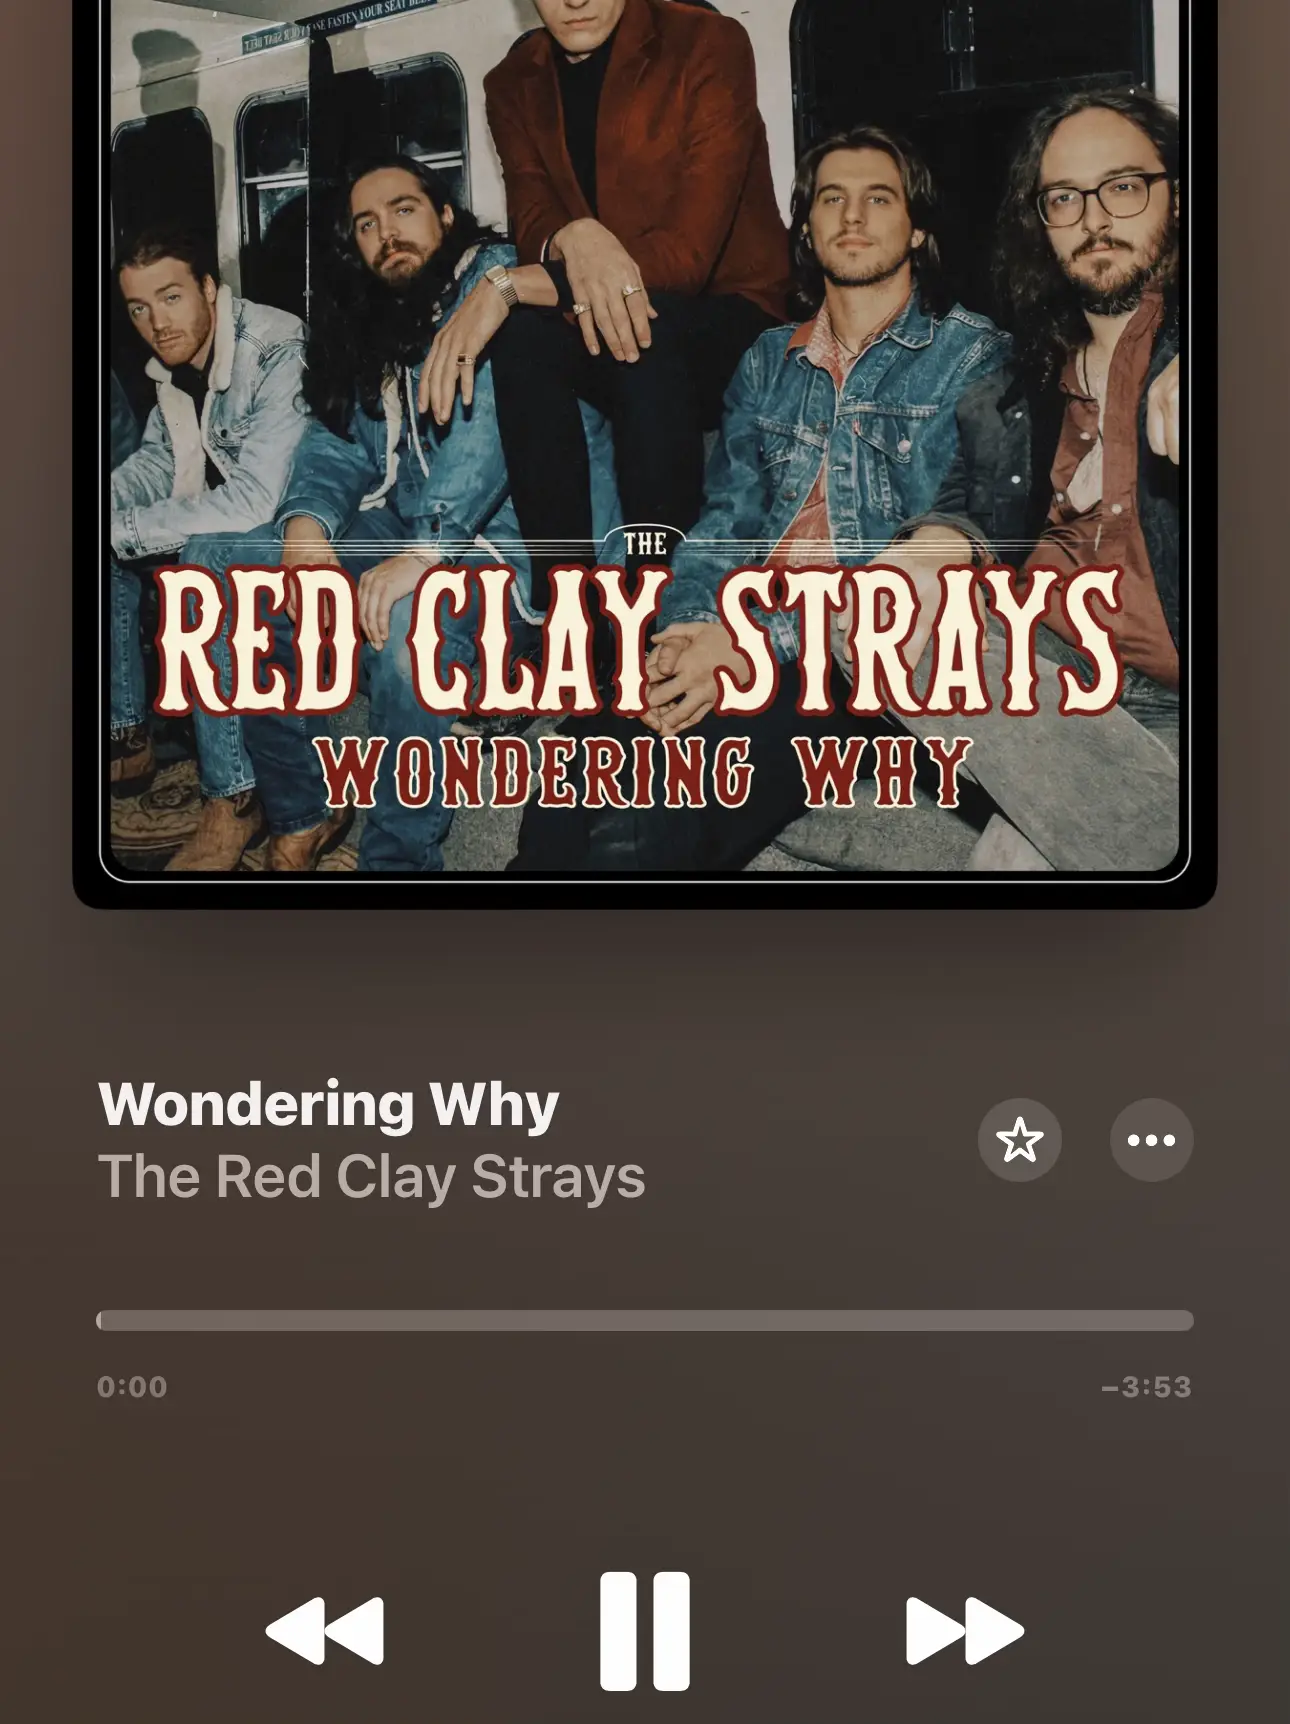  The Red Clay Strays are playing a song on a radio station.